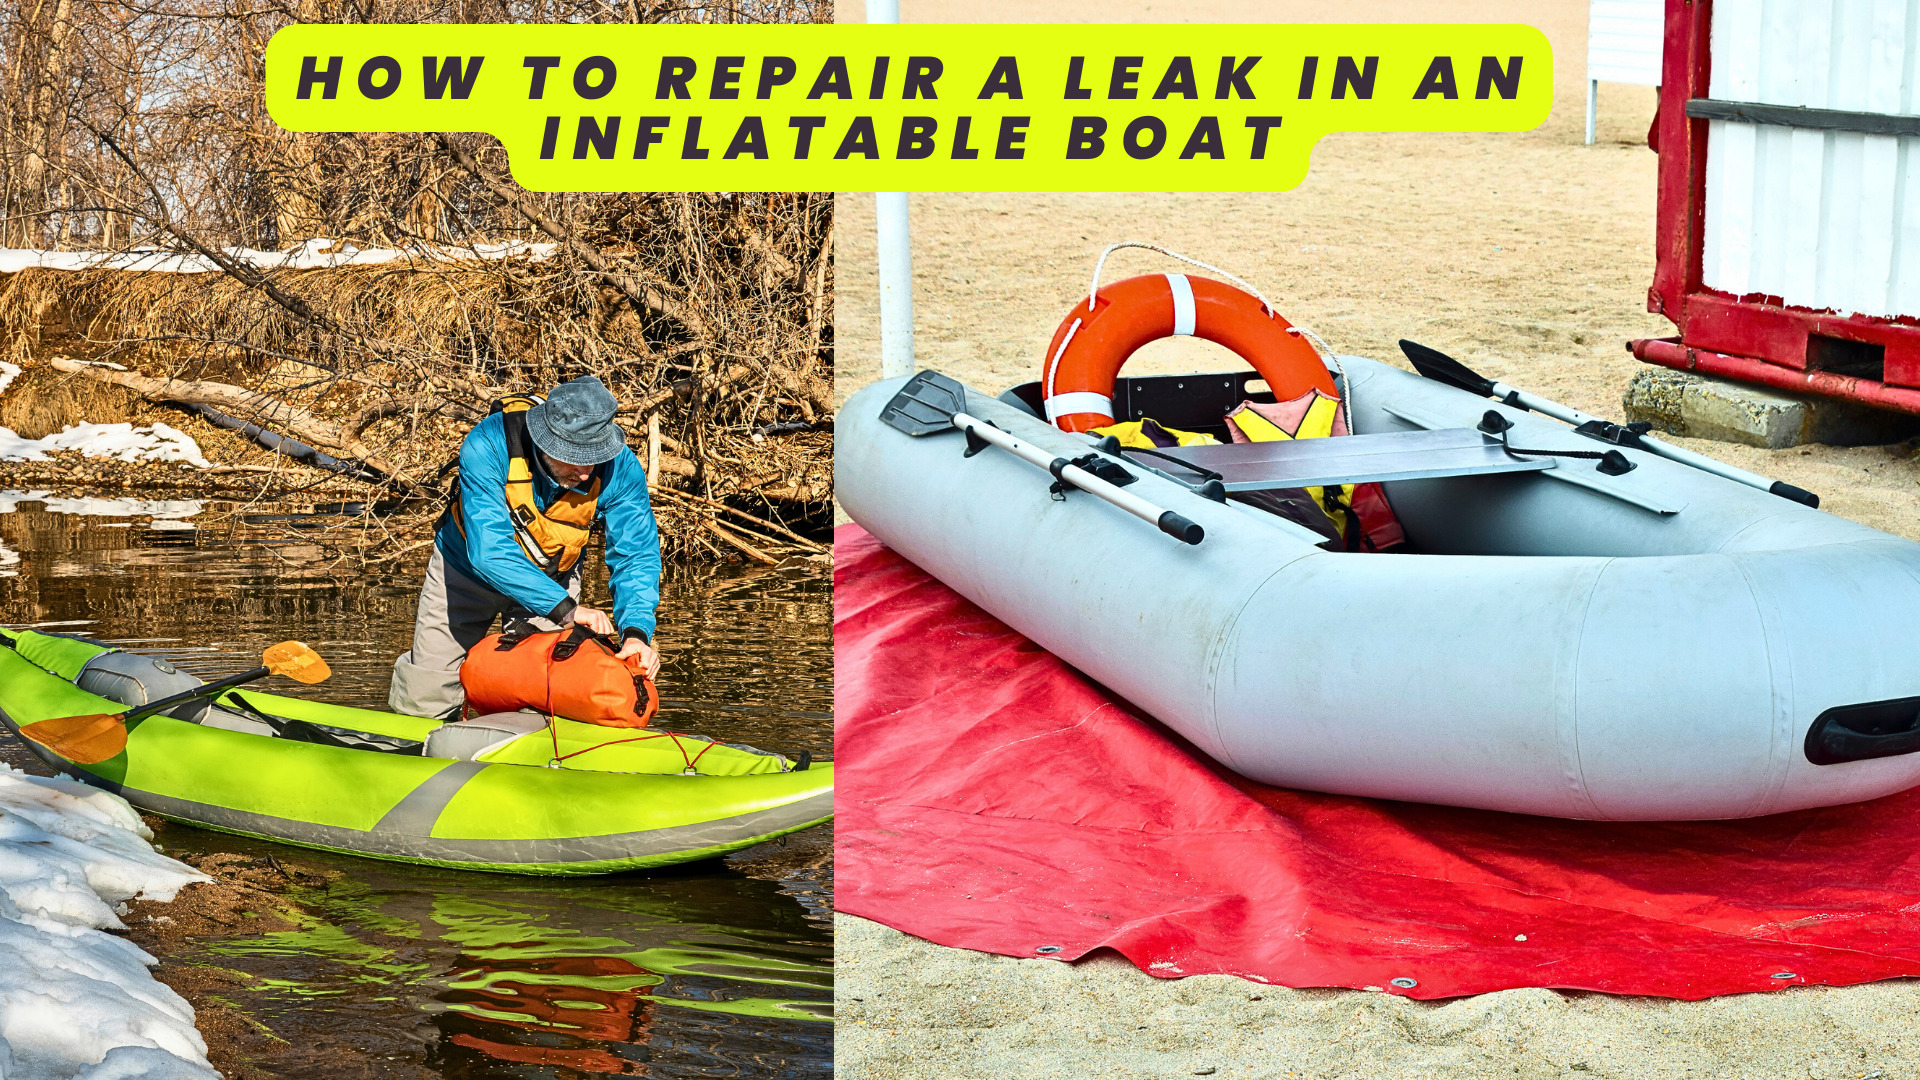 How to Repair a Leak in an Inflatable Boat